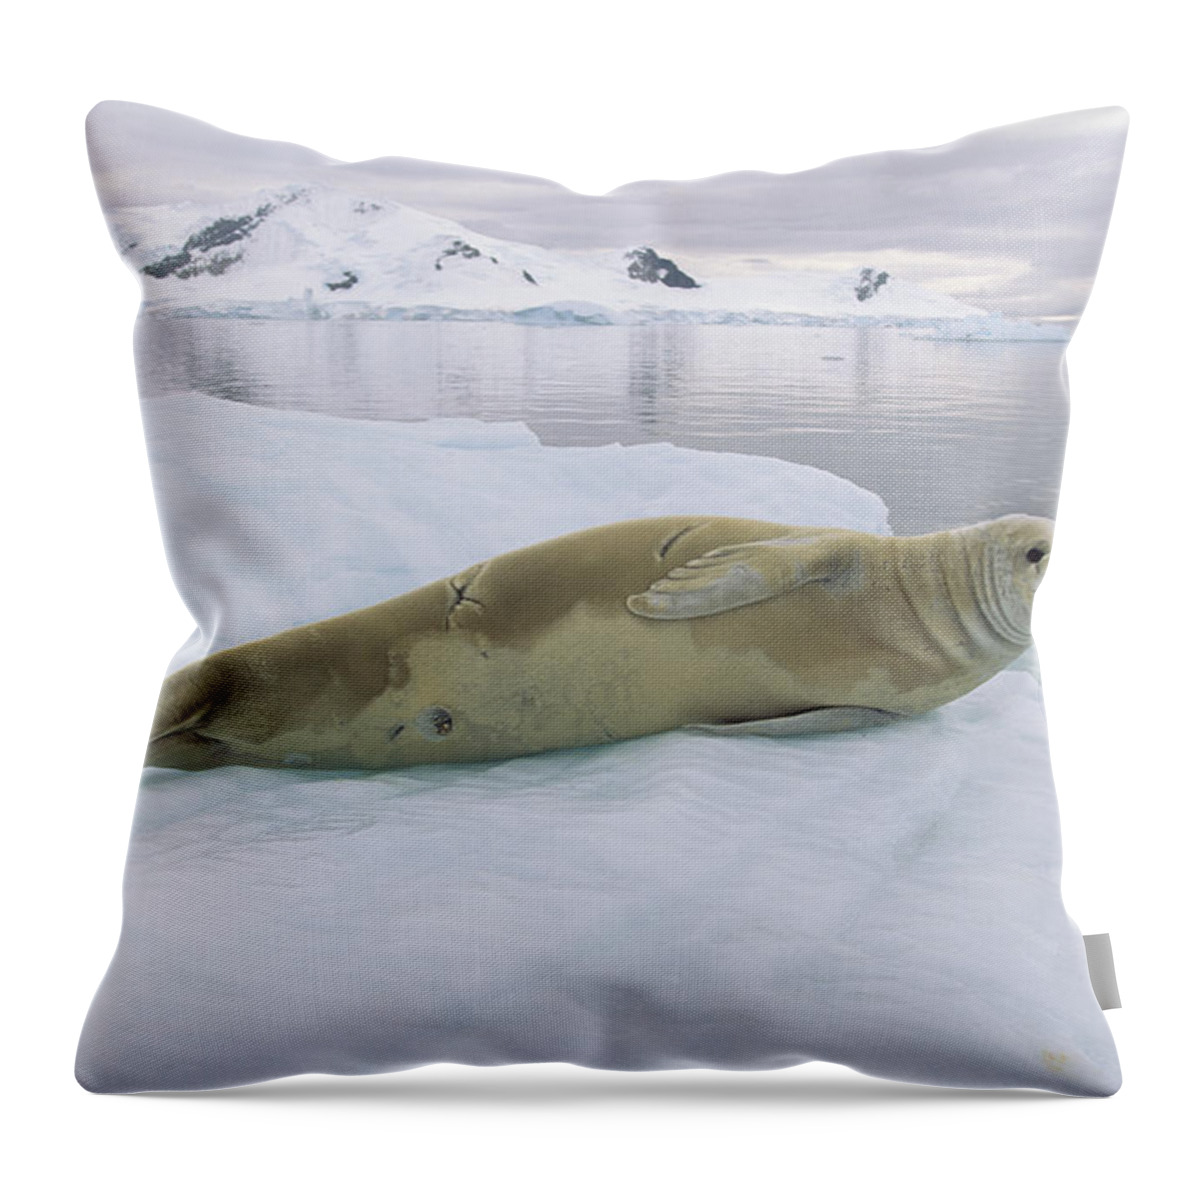 Mp Throw Pillow featuring the photograph Crabeater Seal Lobodon Carcinophagus by Konrad Wothe